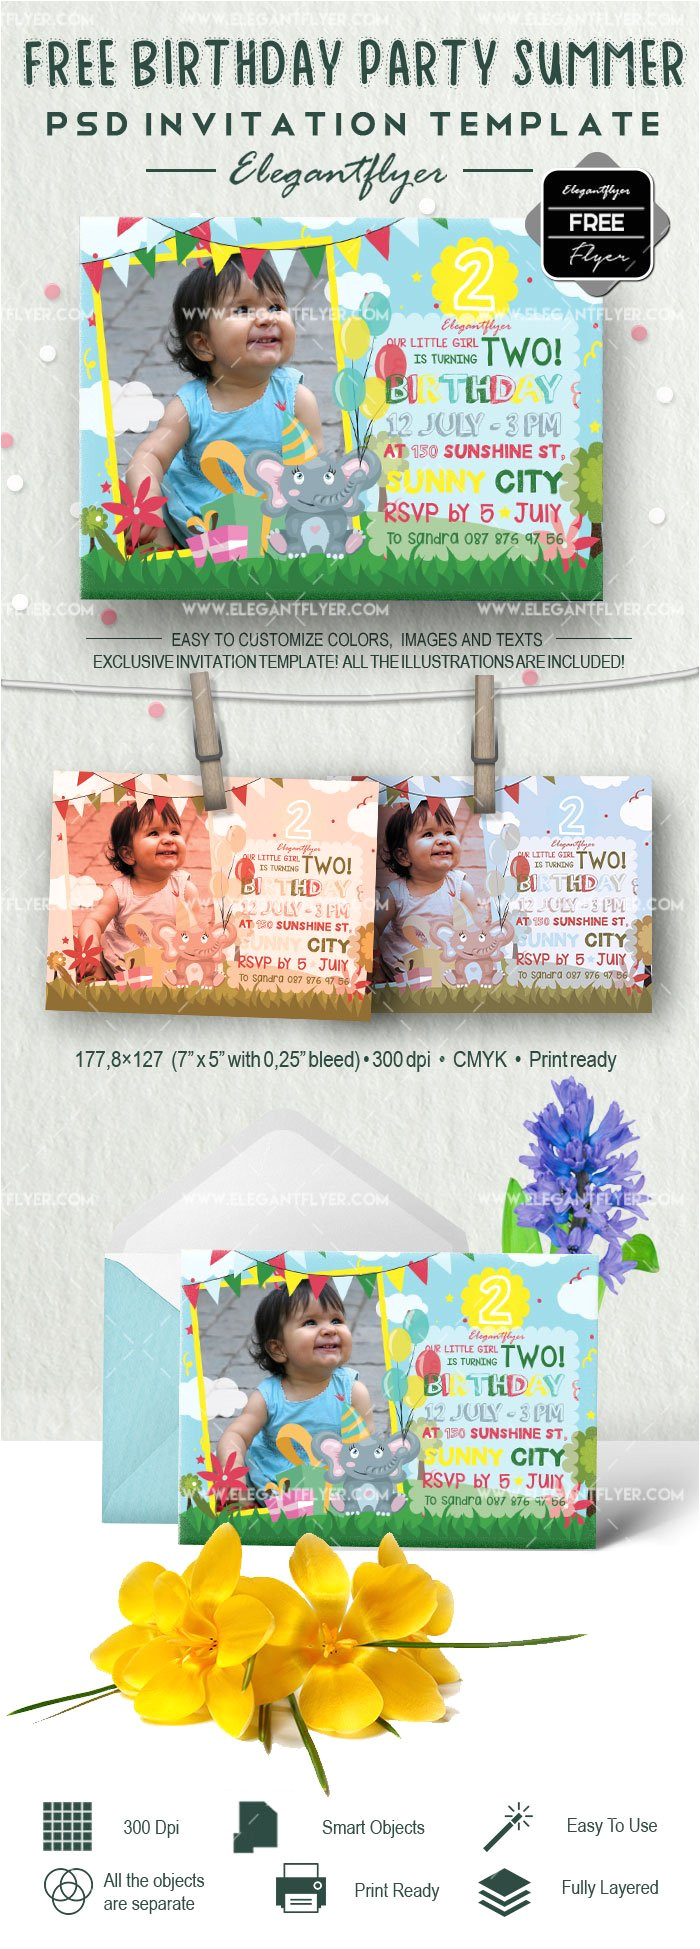 free birthday party summer invitation psd template